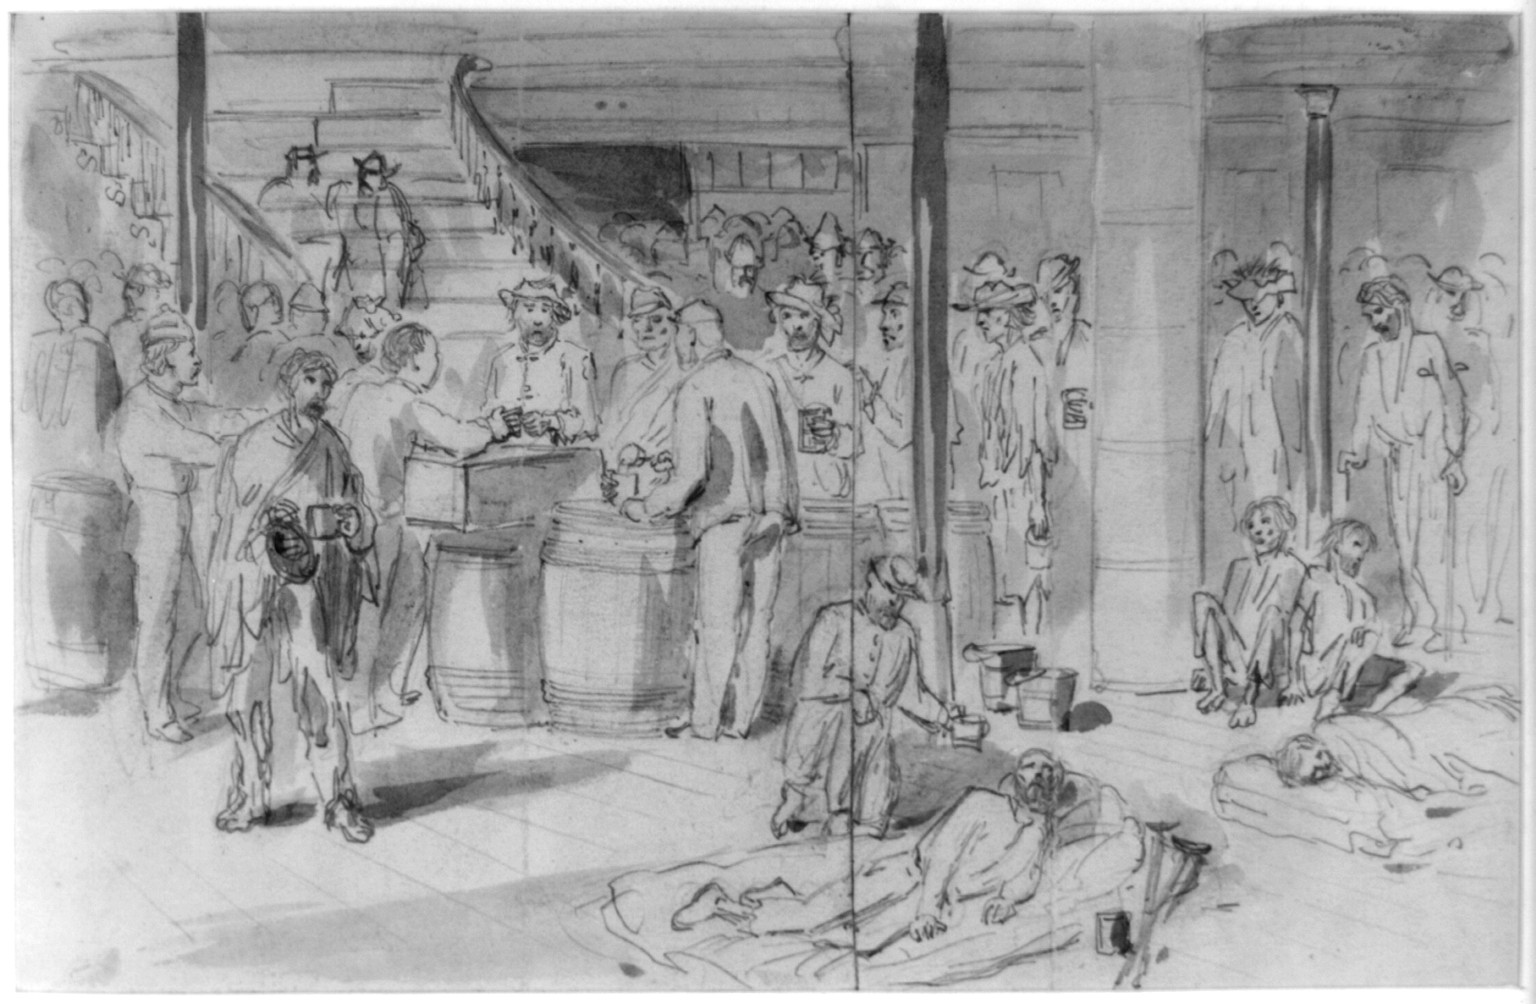 Serving out rations (coffee, bread & meat) to the exchanged prisoners on board the New York